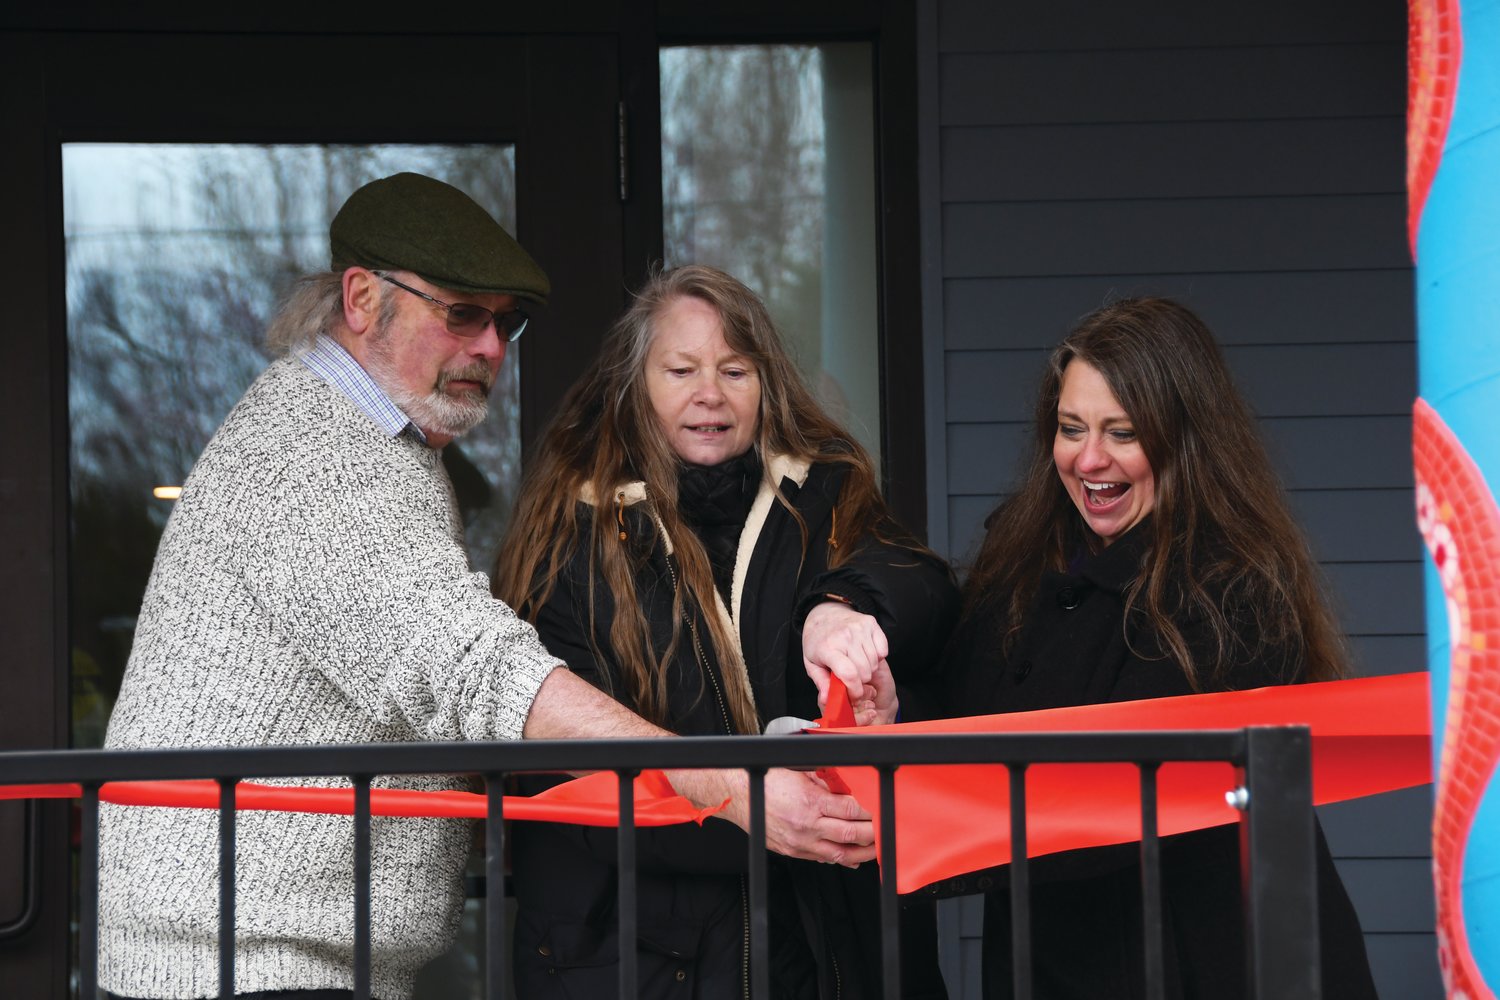 Dale Wilson, Kathy Morgan, and Cherish Cronmiller of OlyCAP cut the ribbon to open 7th Haven after six years of hard work.